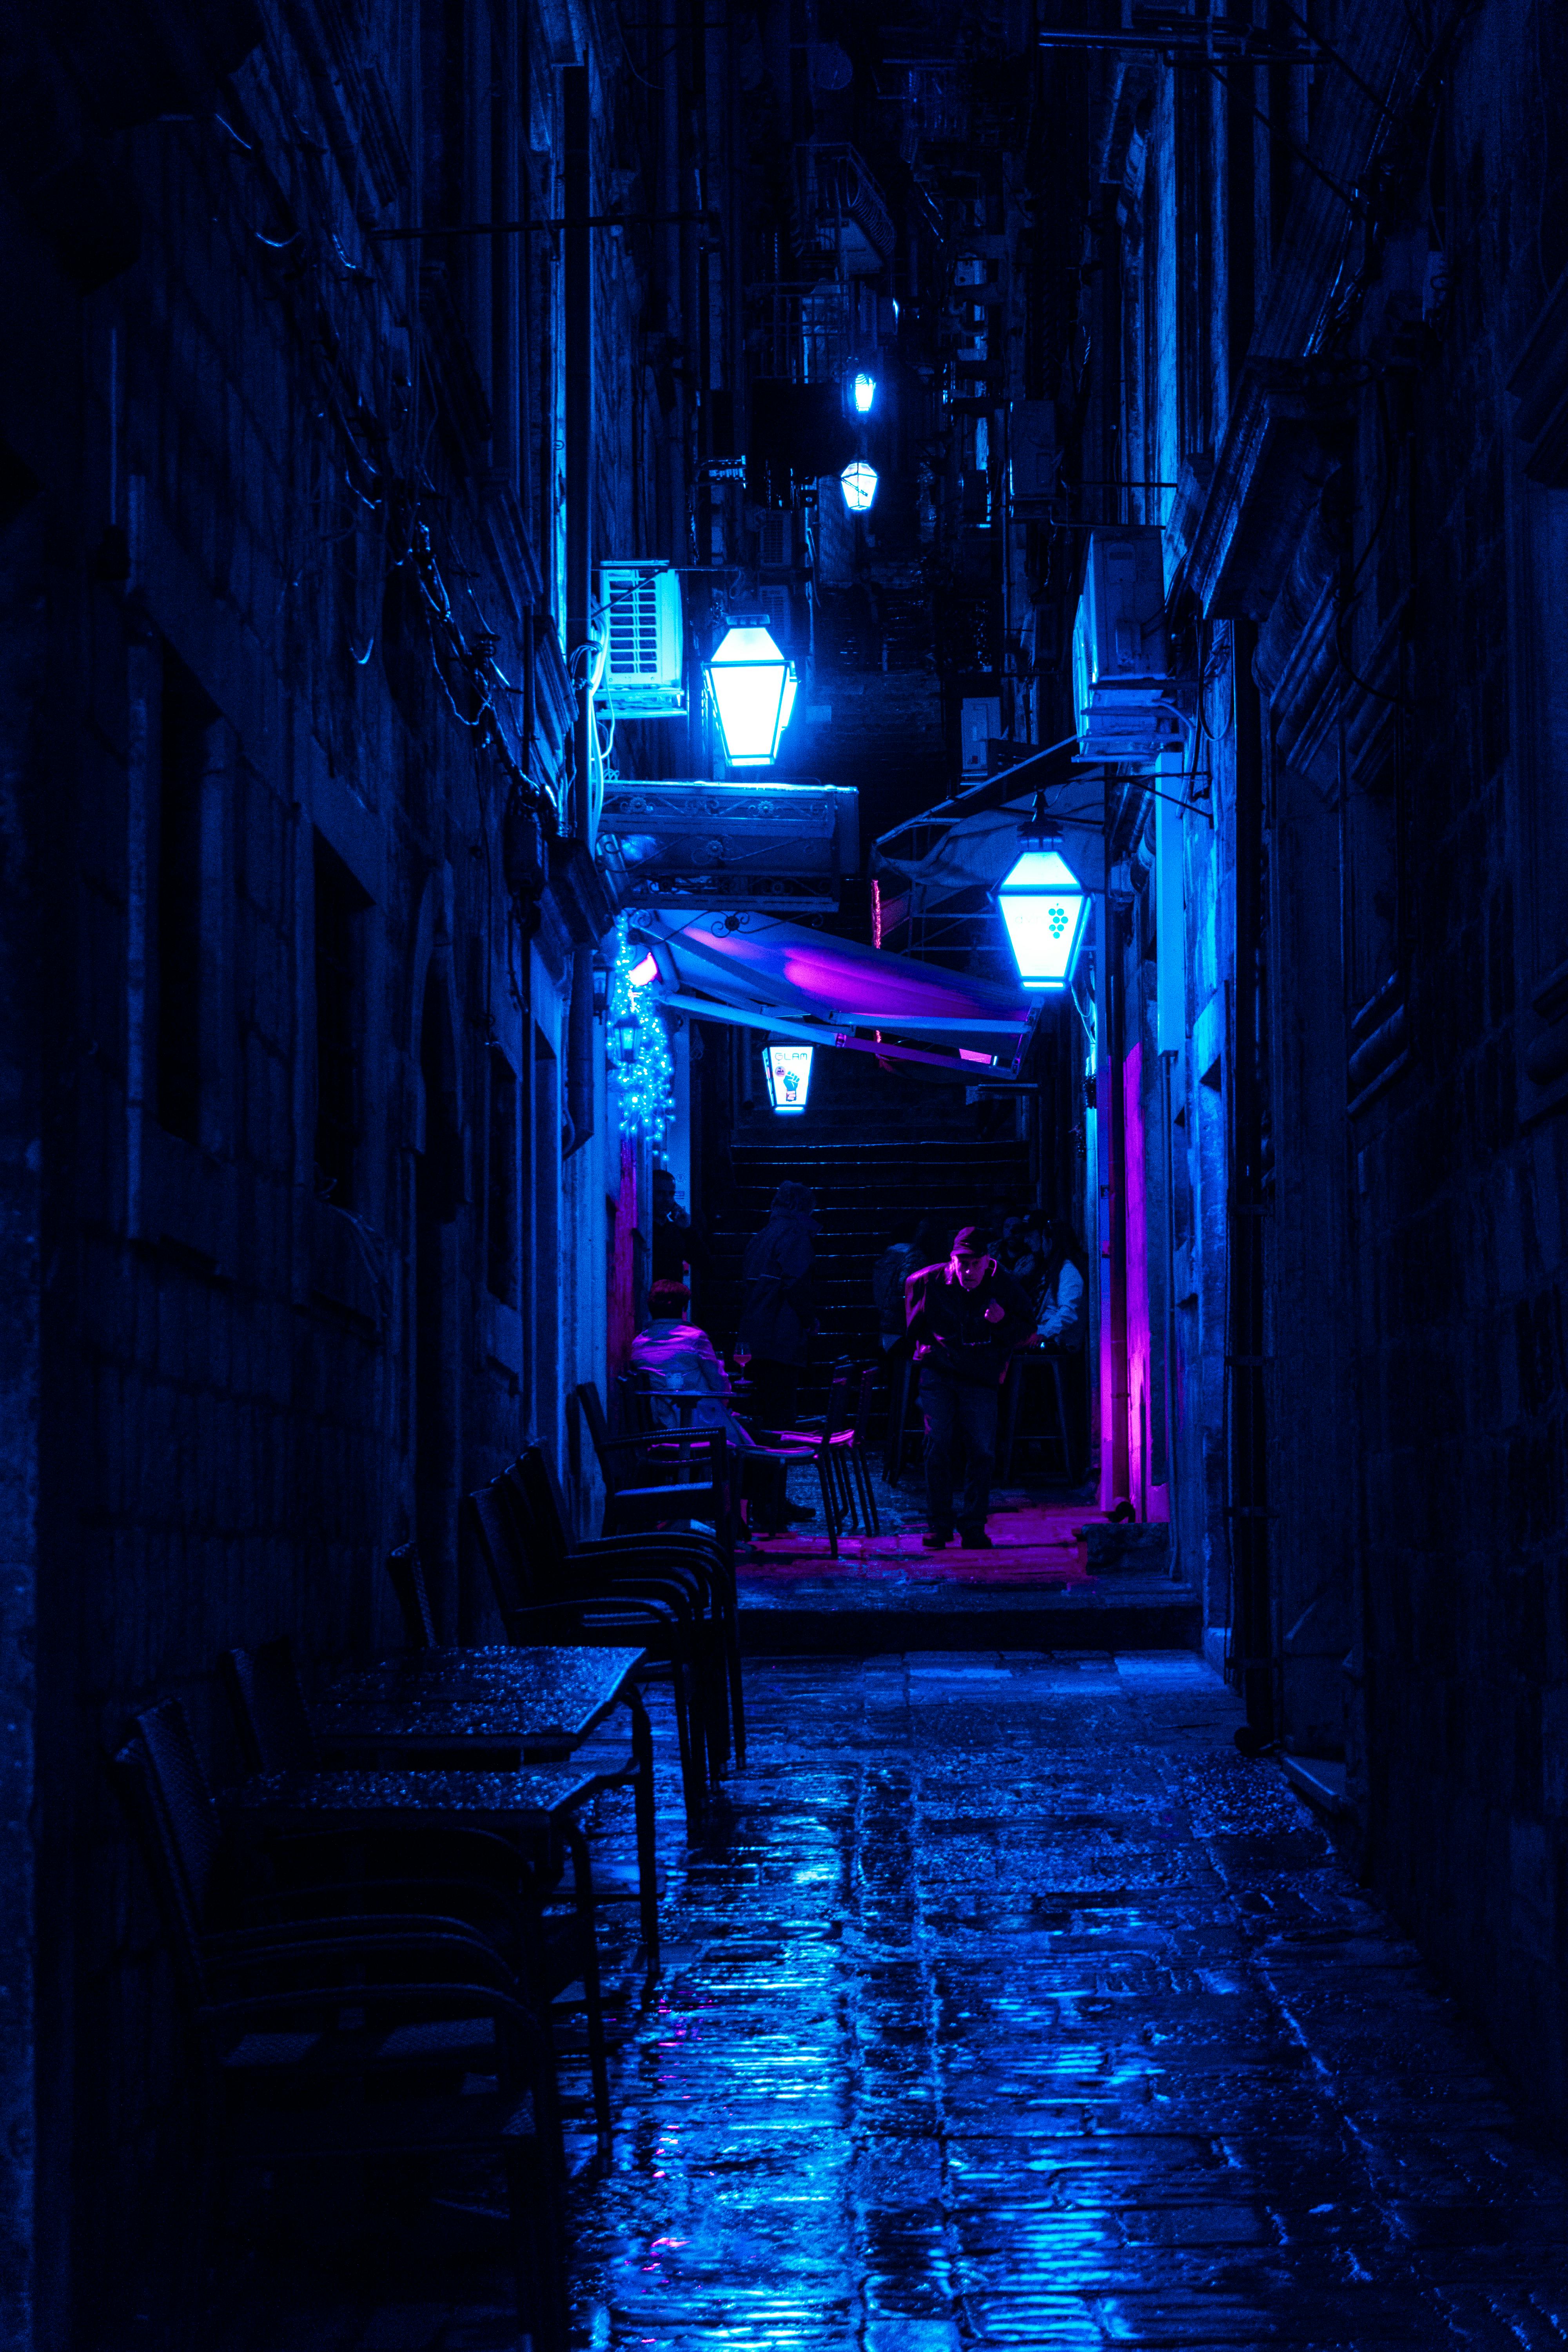 Dark Alley With Turned-on Street Lamps · Free Stock Photo